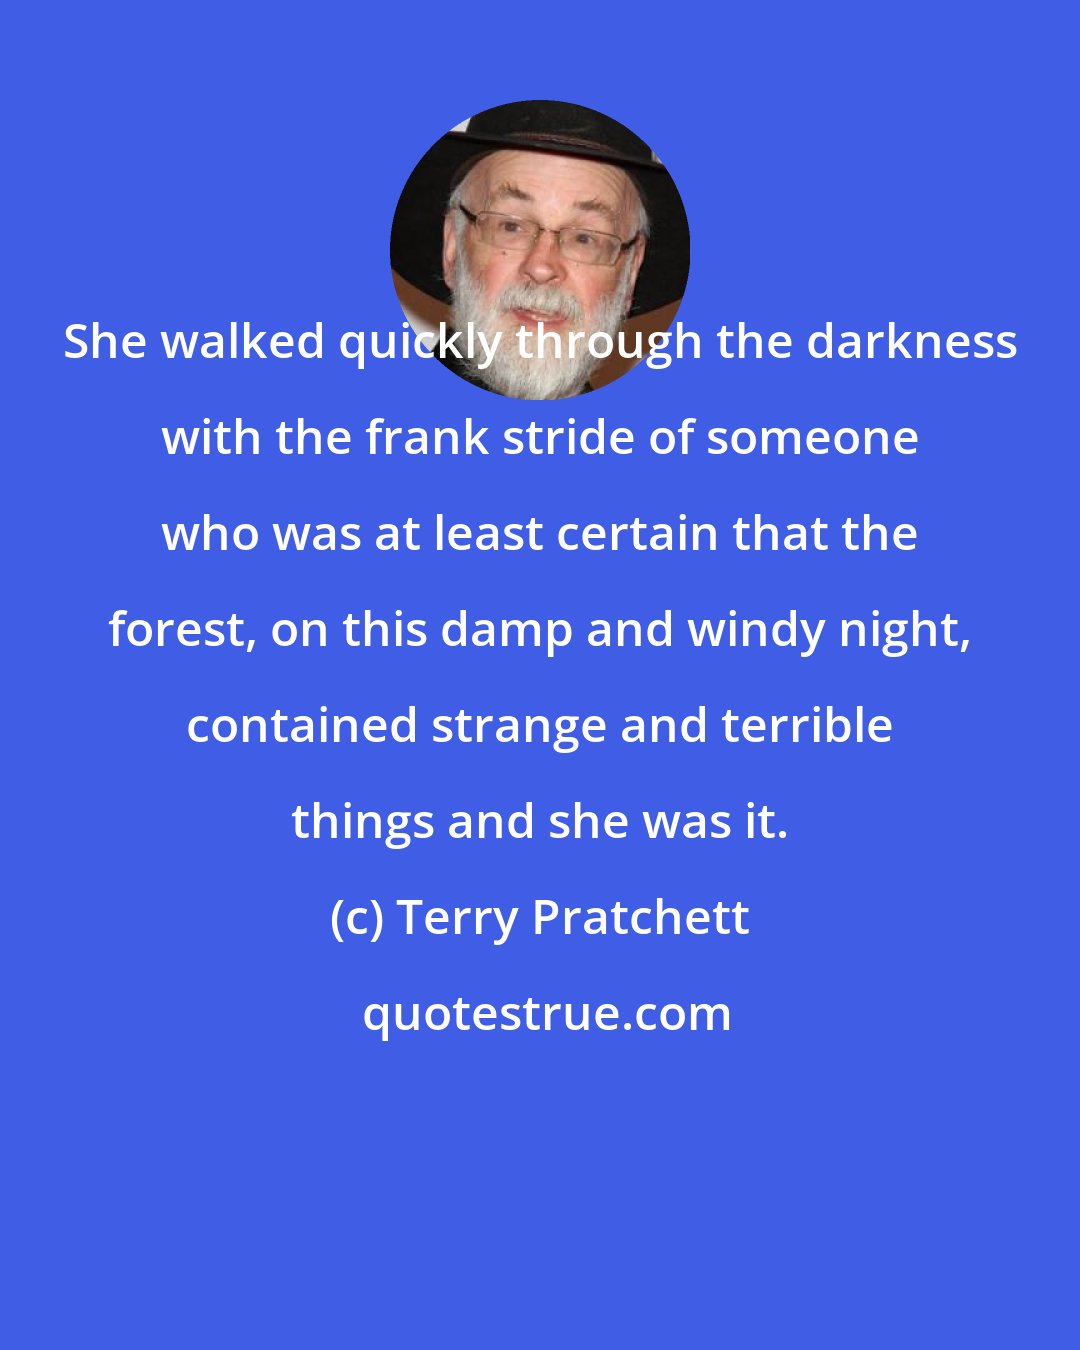 Terry Pratchett: She walked quickly through the darkness with the frank stride of someone who was at least certain that the forest, on this damp and windy night, contained strange and terrible things and she was it.